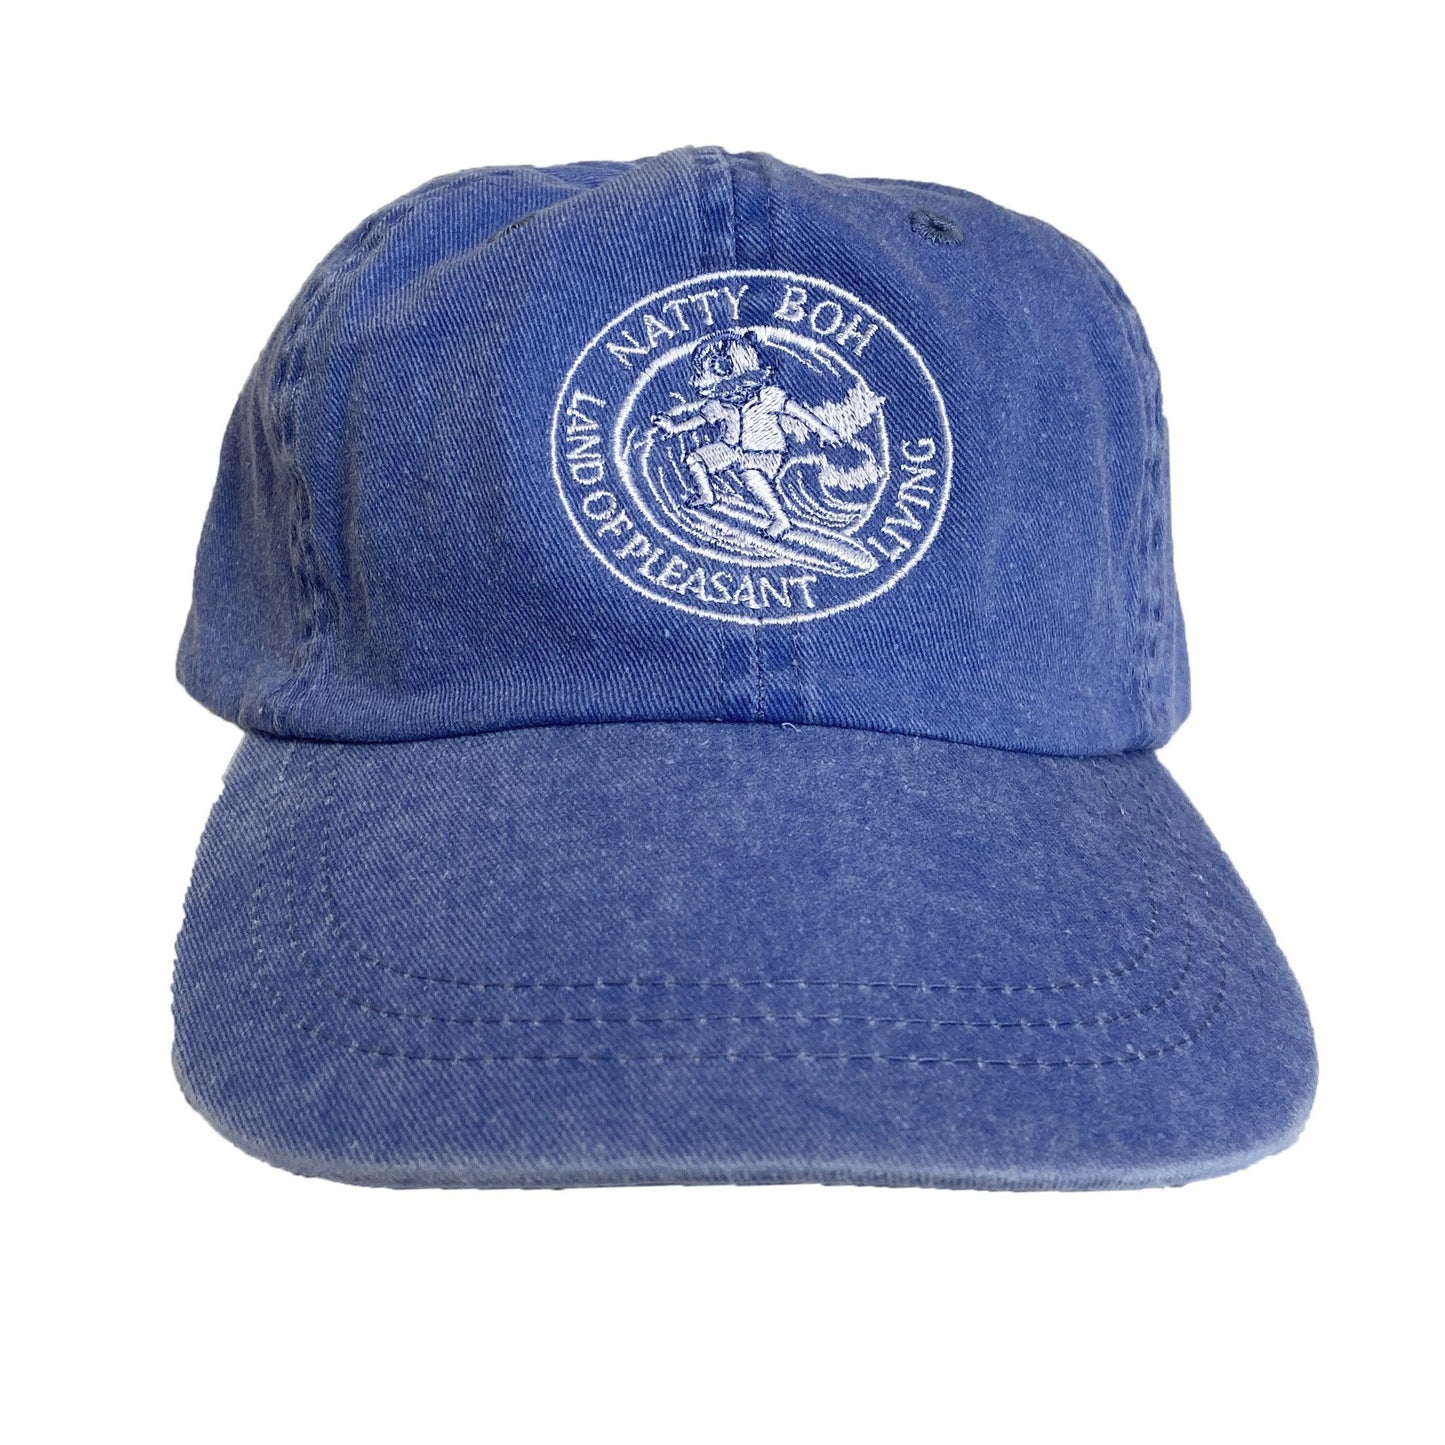 Retro Boh Wave Surfing (Royal) / Baseball Hat - Route One Apparel